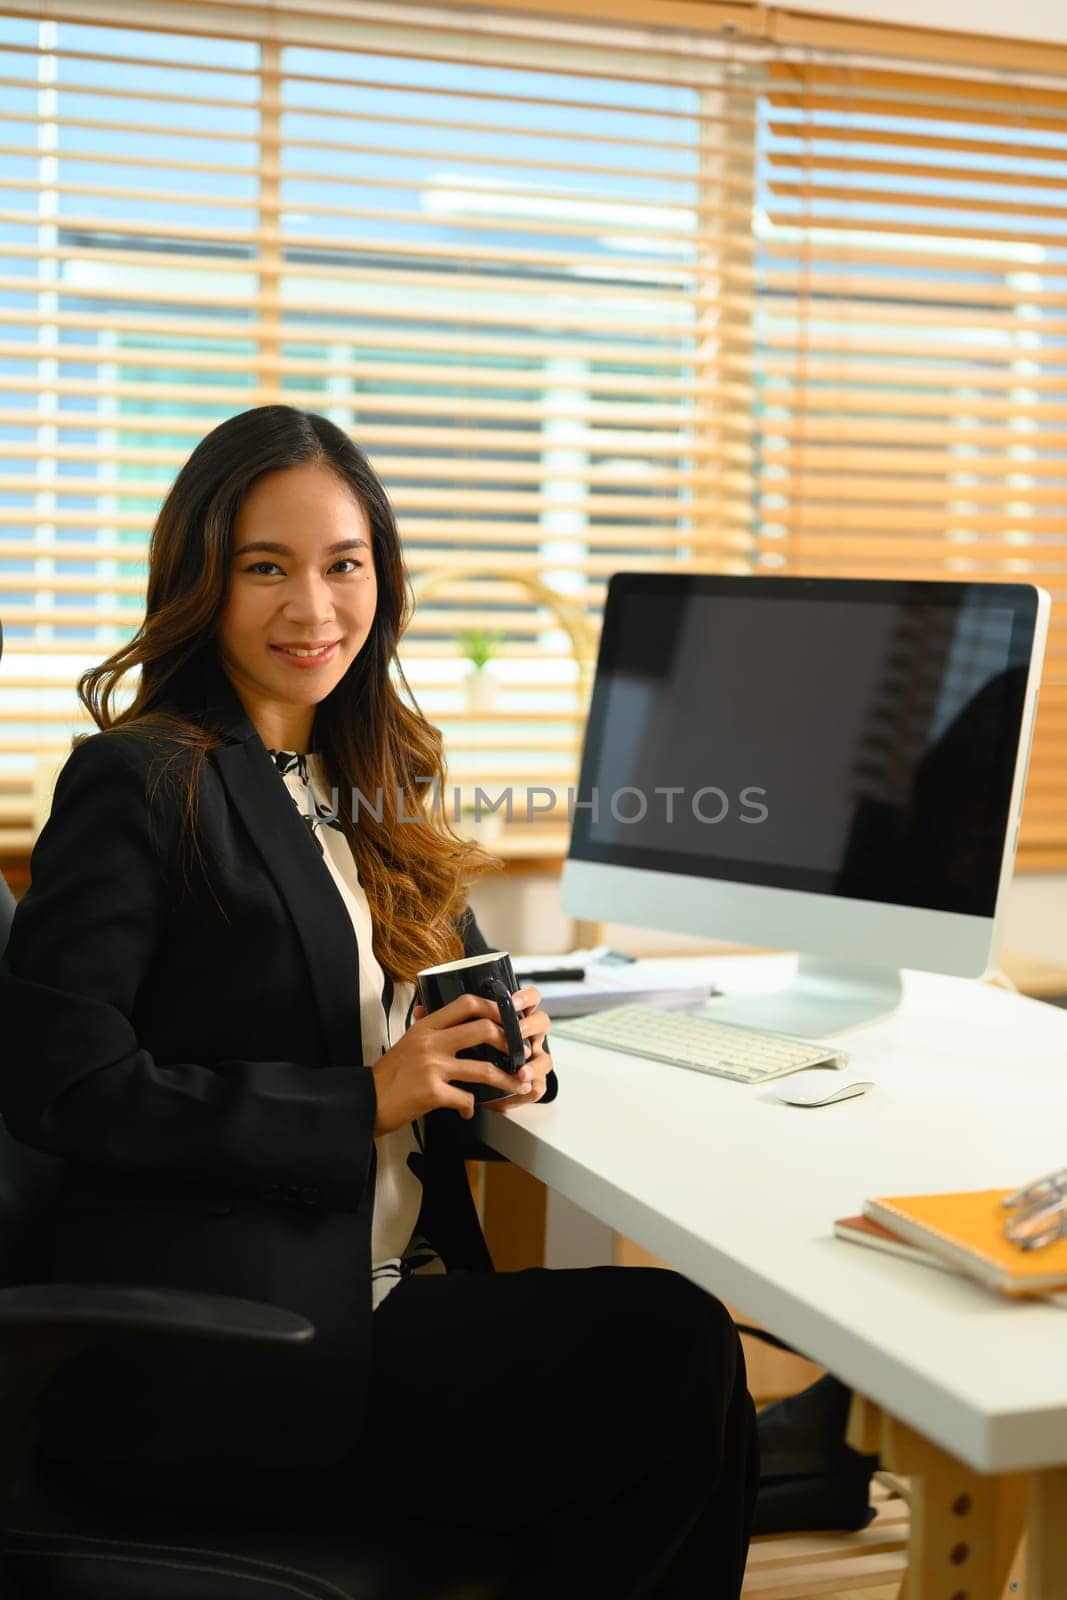 Portrait of successful businesswoman with cup of coffee sitting at desk and smiling at camera.